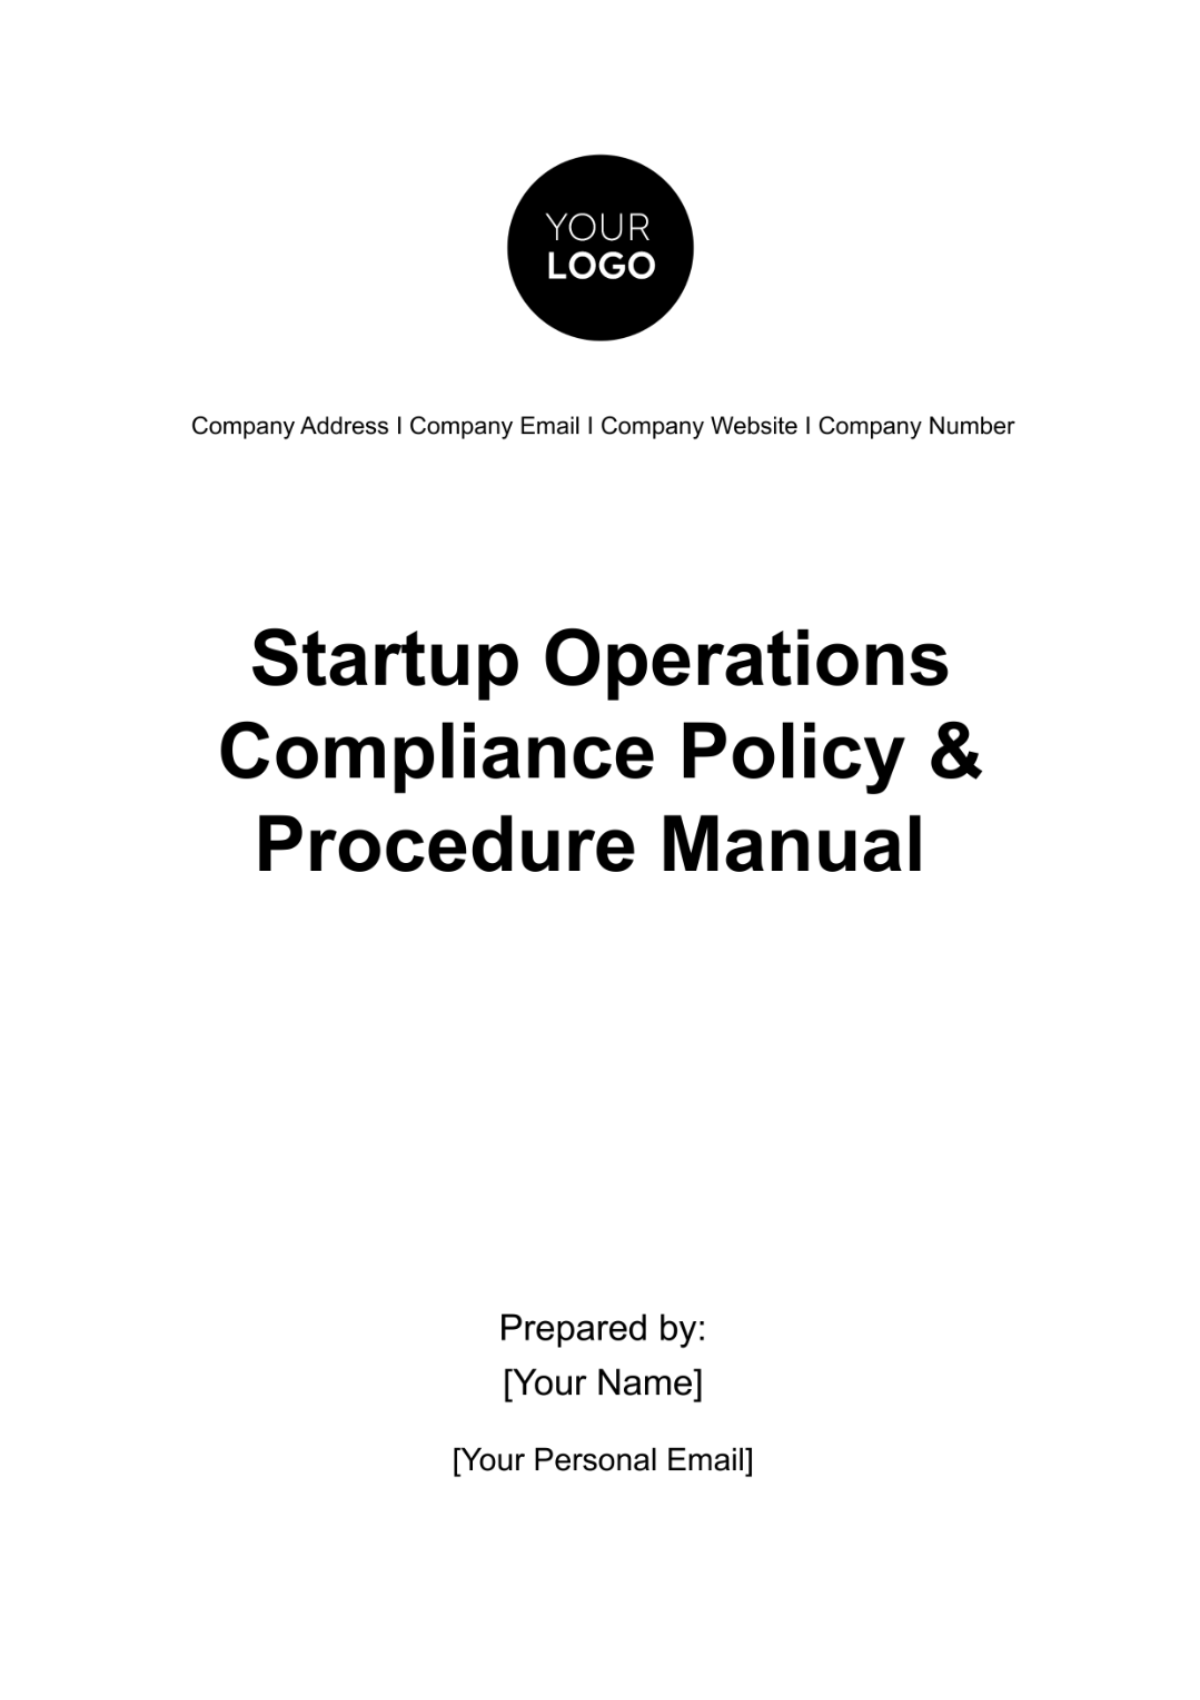 Free Startup Operations Compliance Policy & Procedure Manual Template